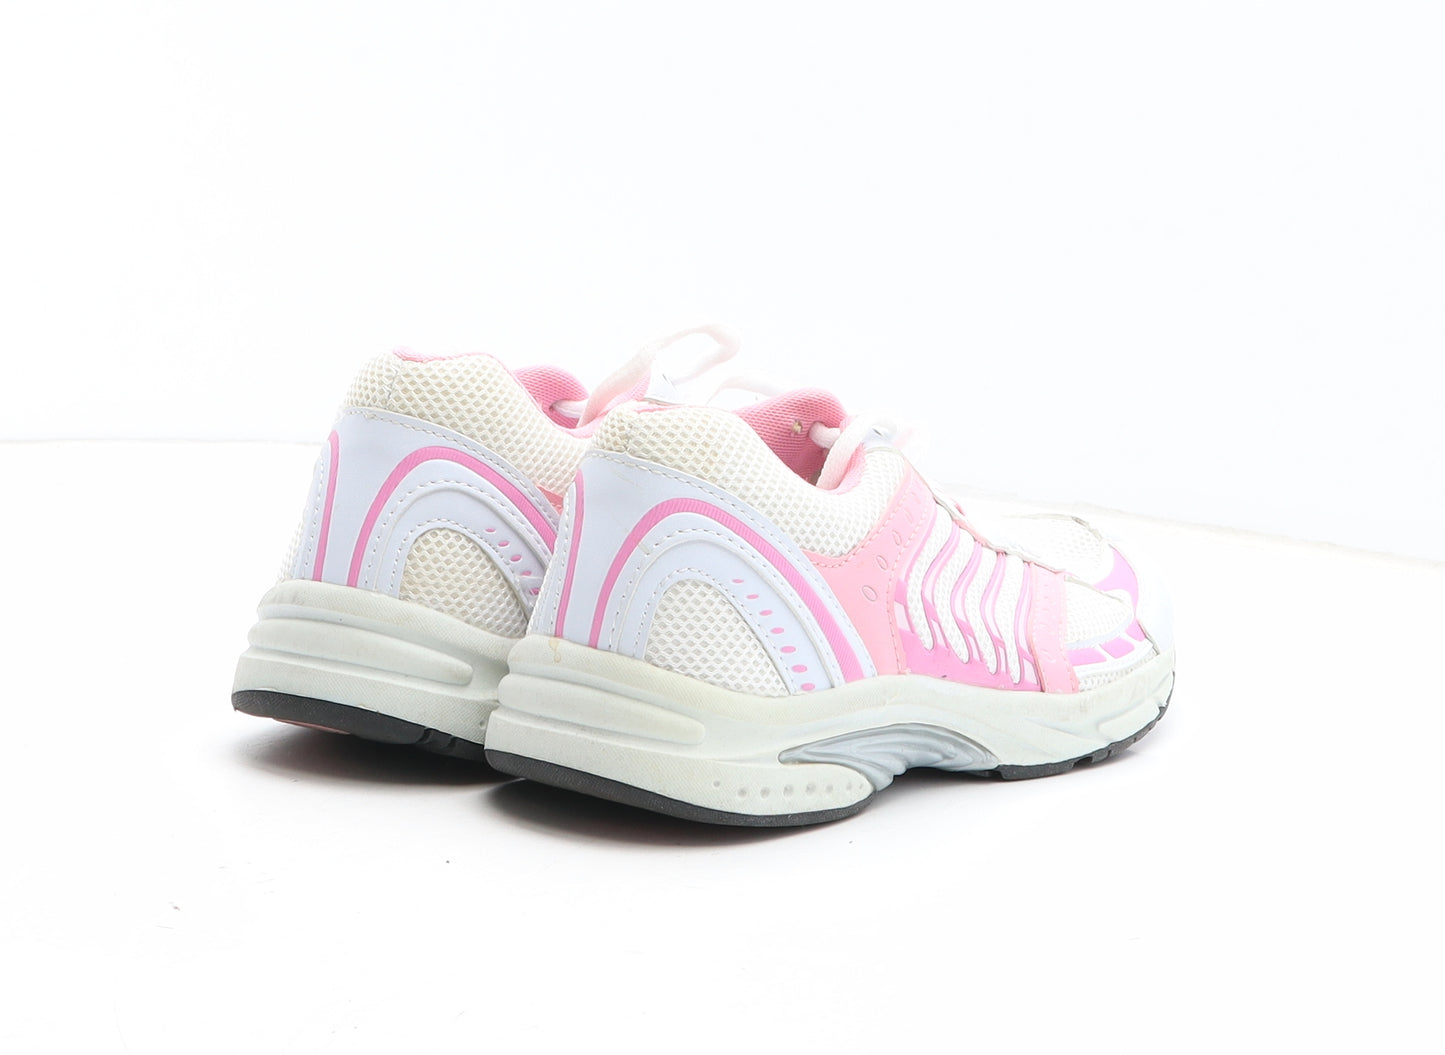 Just4U Womens White Synthetic Trainer UK